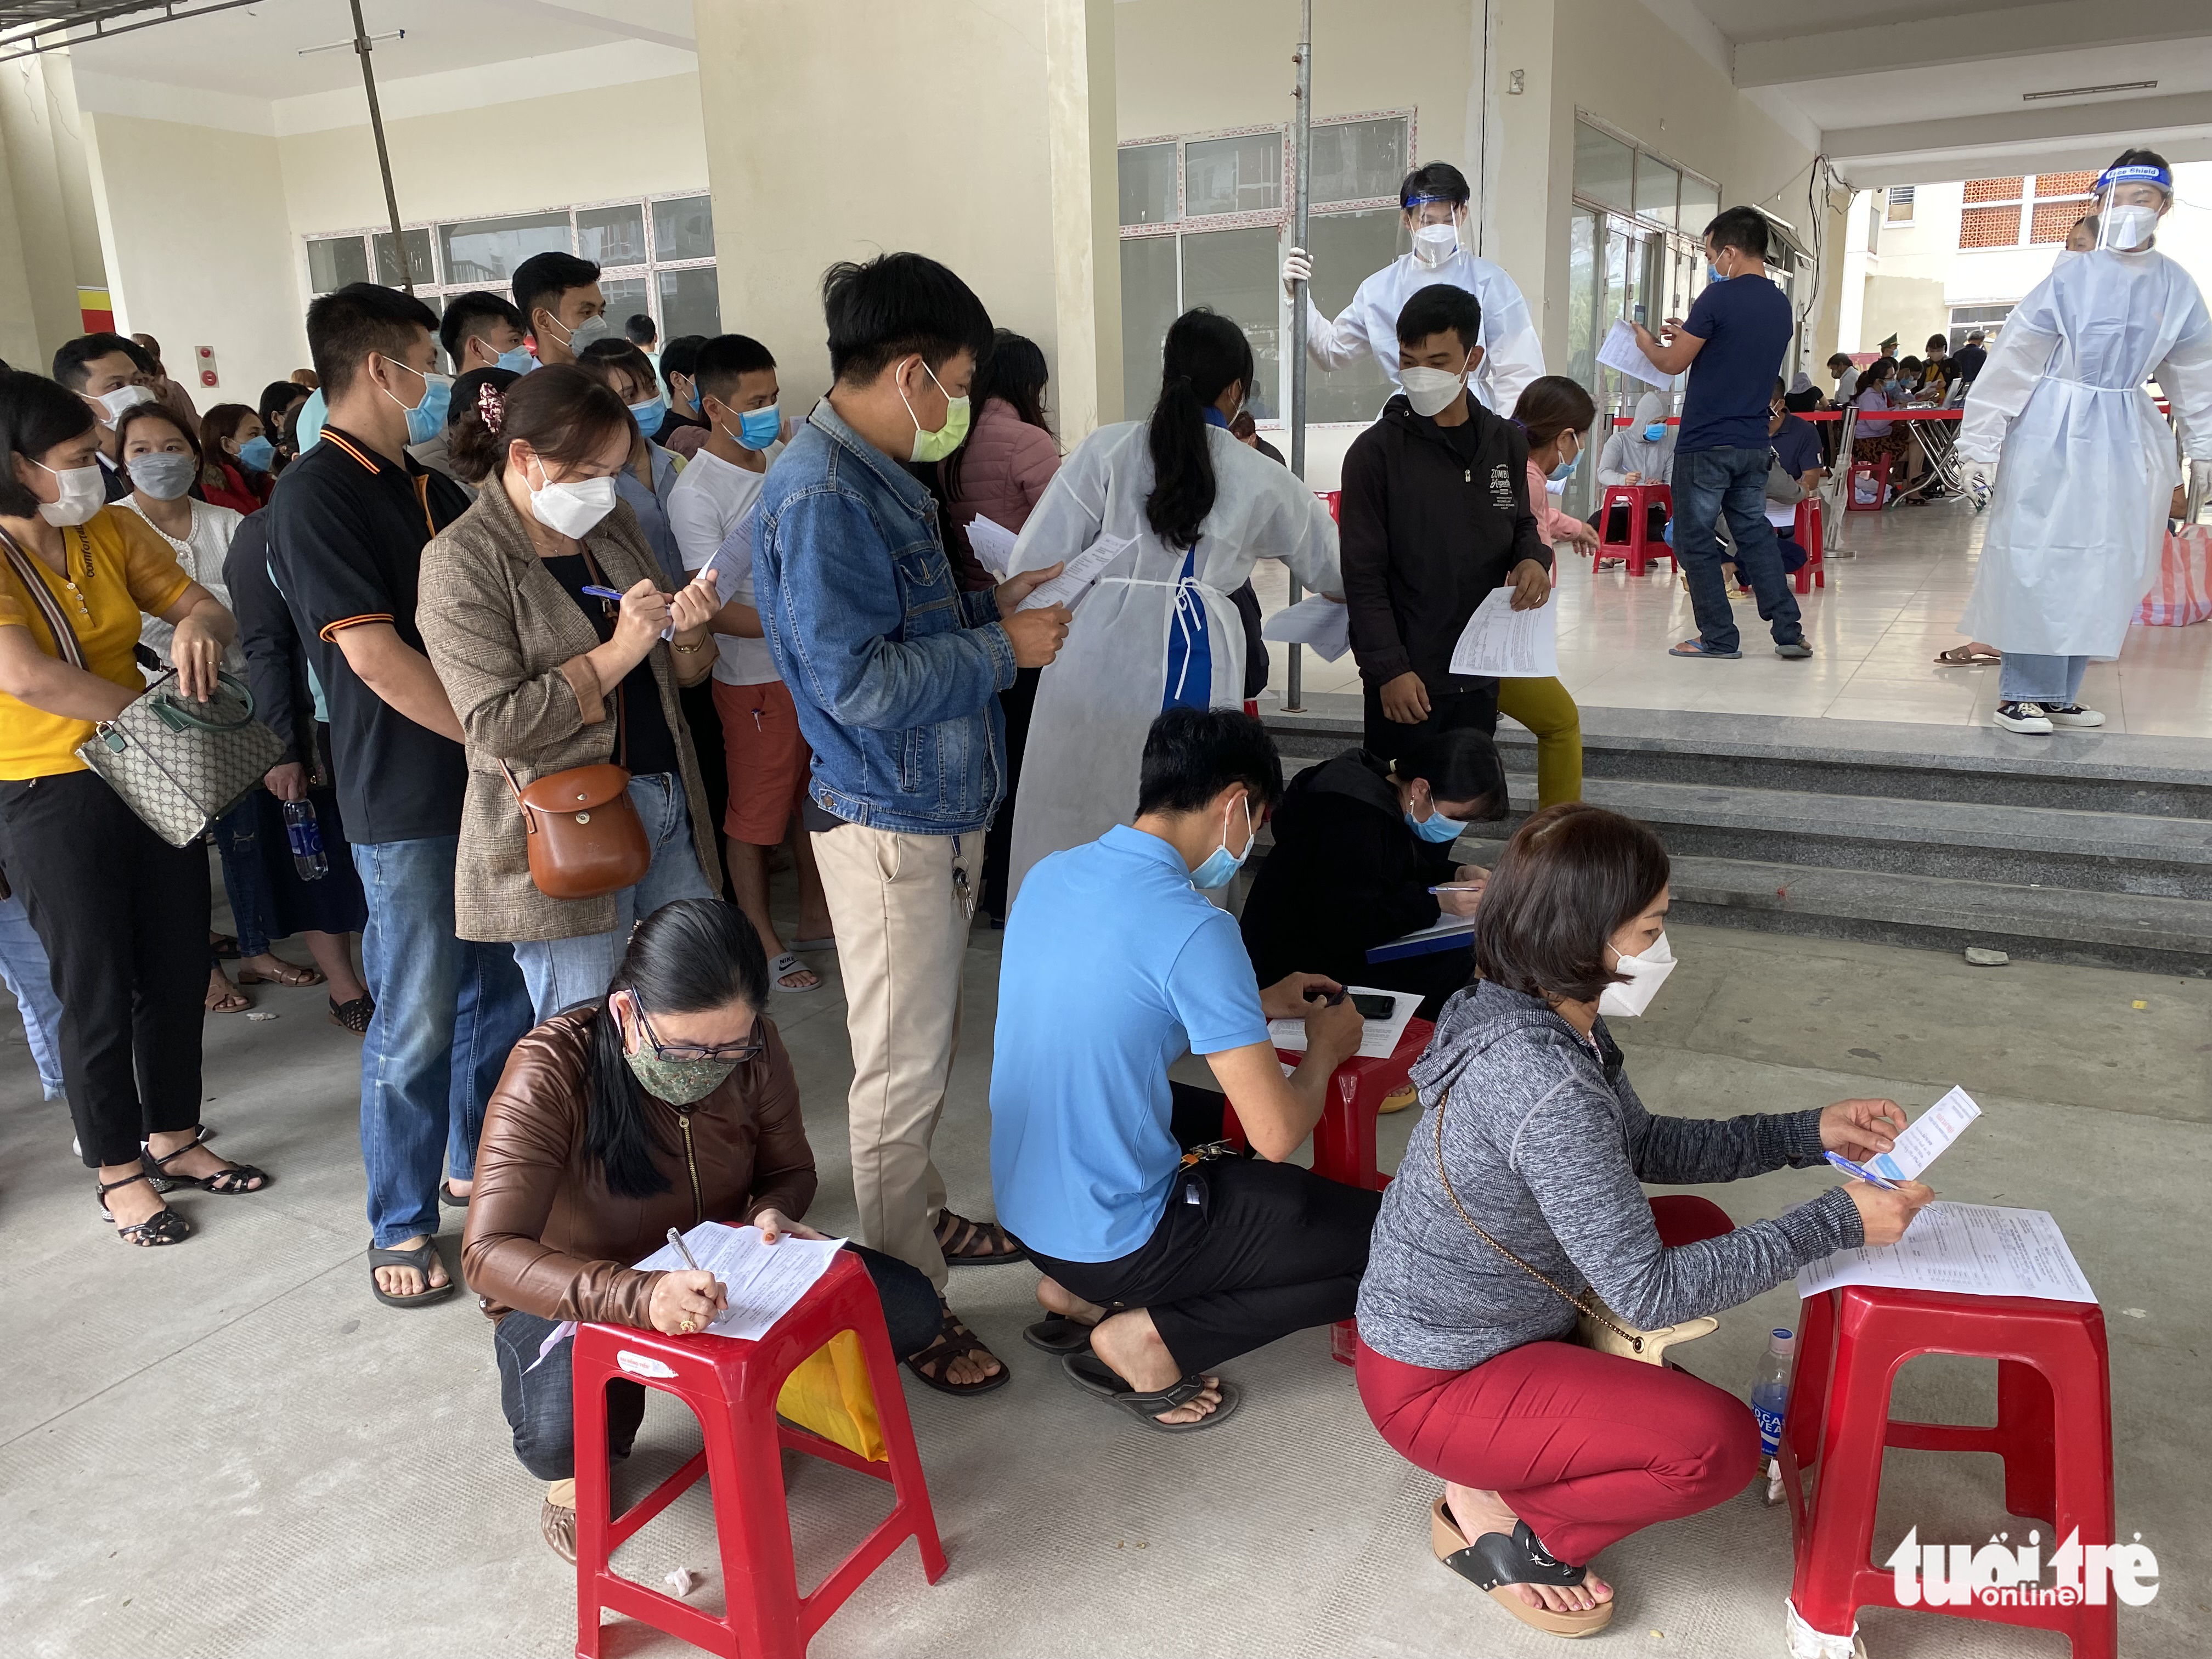 People wait to get vaccinated against COVID-19 in Da Nang City, Vietnam after the Lunar New Year holiday, February 10, 2022. Photo: B.D. / Tuoi Tre